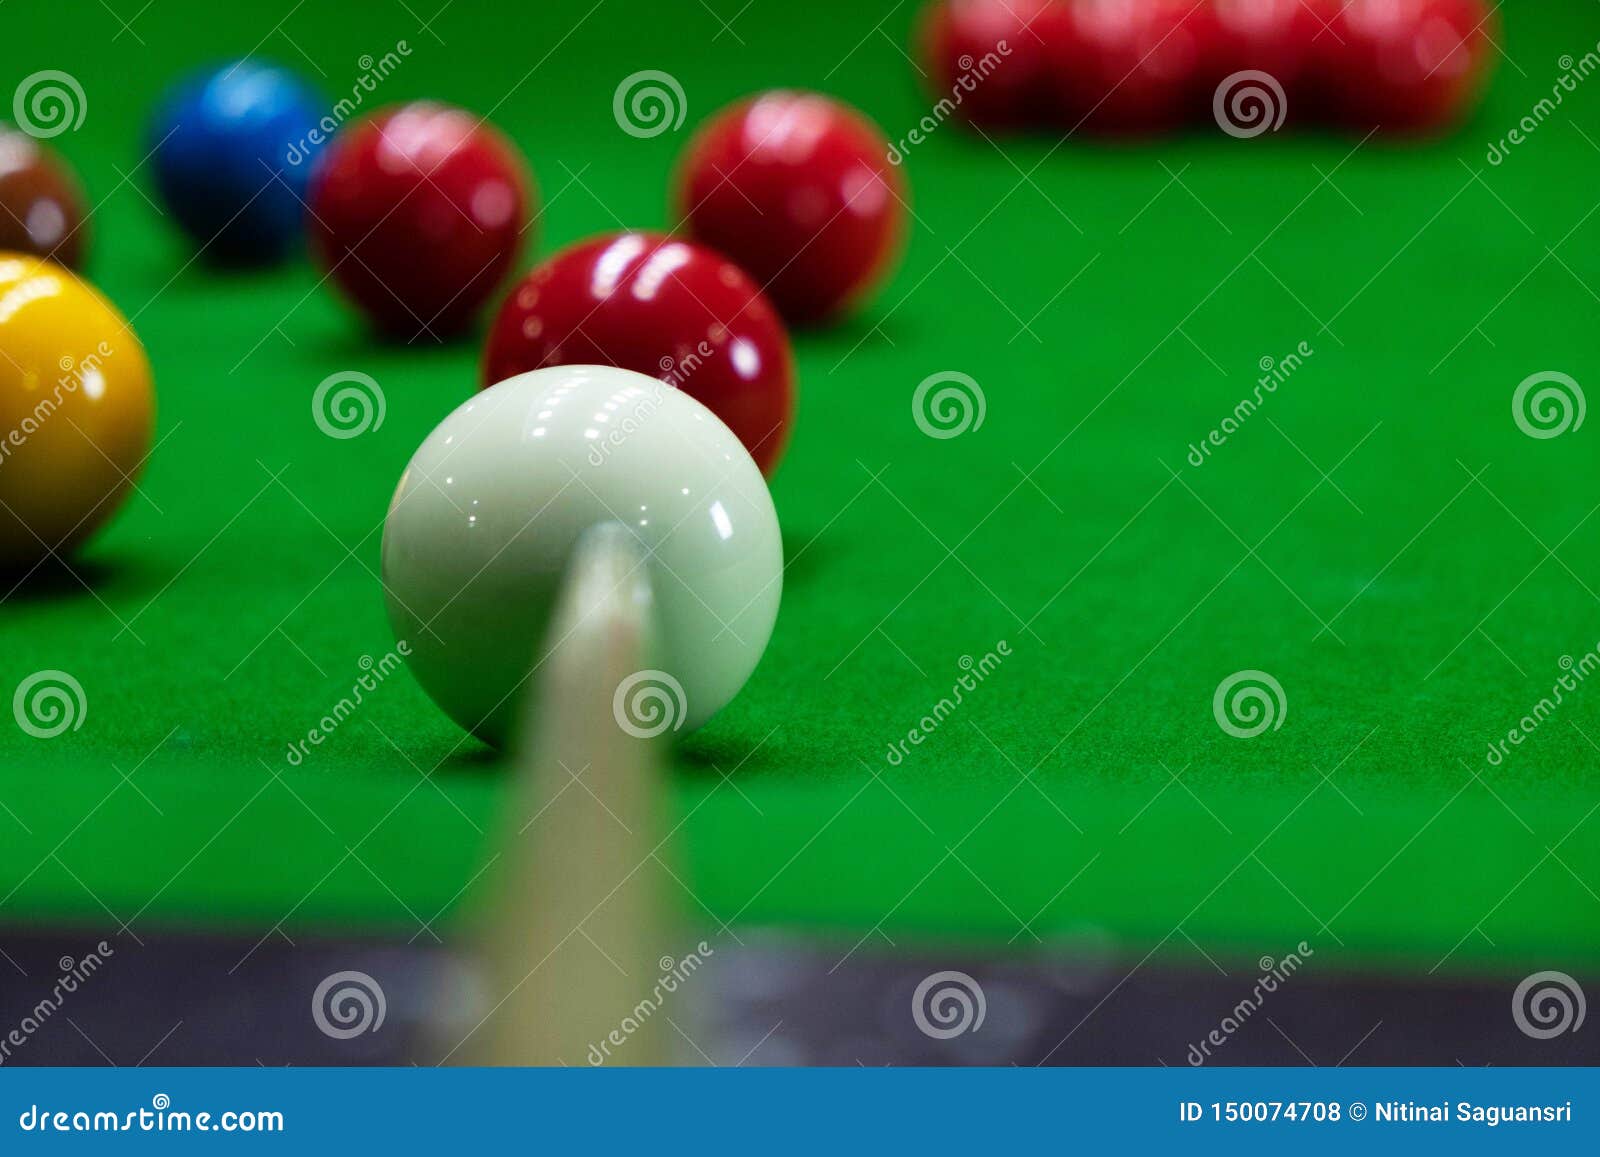 Playing Snooker, Piercing the Red Ball, Black, Aiming the Ball and  Pocketing the Hole To Score Points Stock Photo - Image of black, goals:  150074708